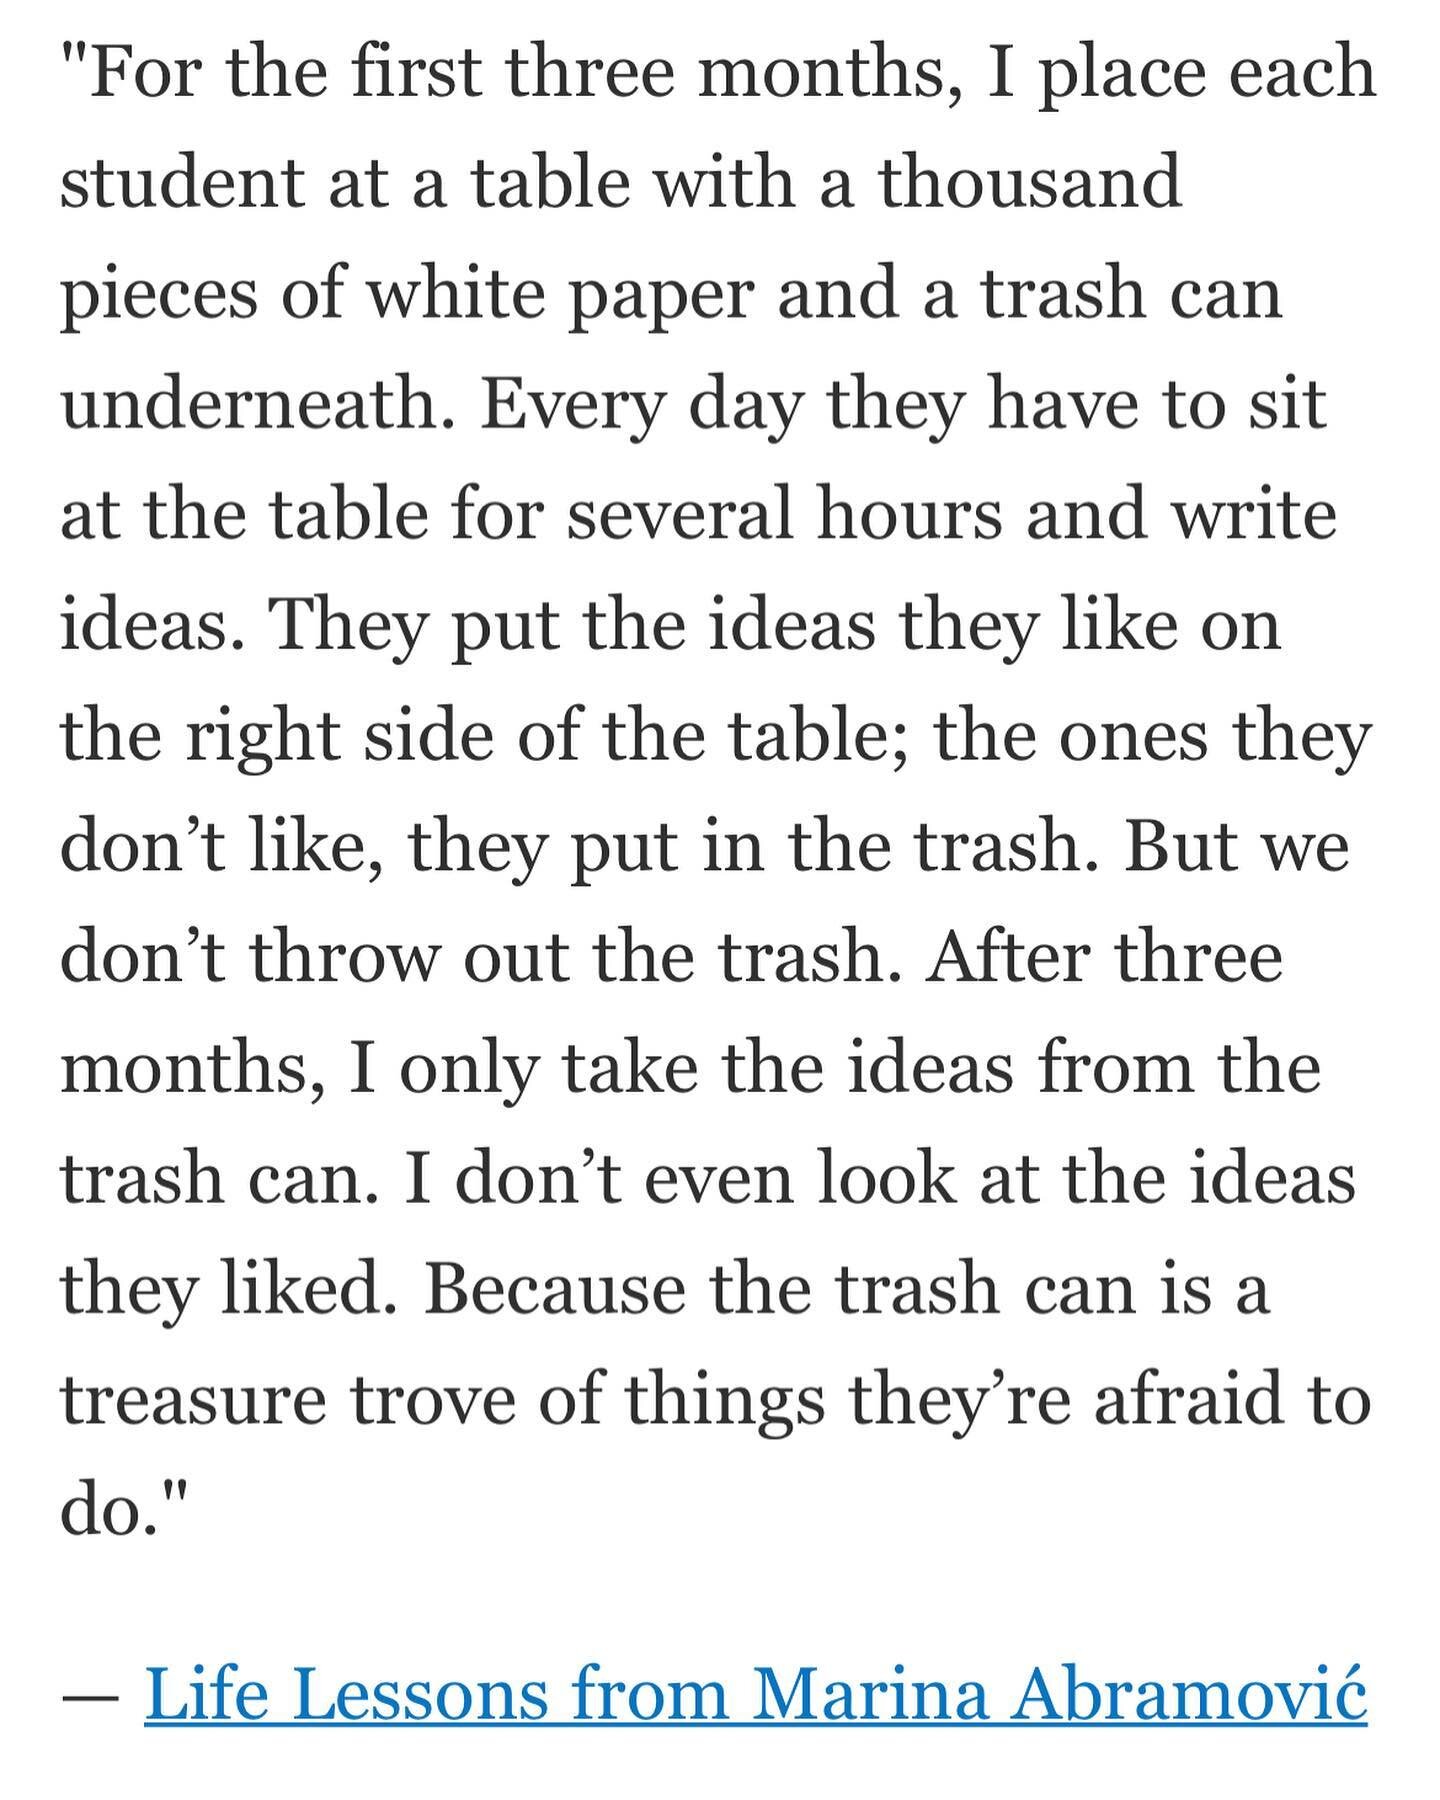 Wise advice. I&rsquo;m often scared to put some ideas to paper, much less use them or share them. I guess we need to keep the trash around!